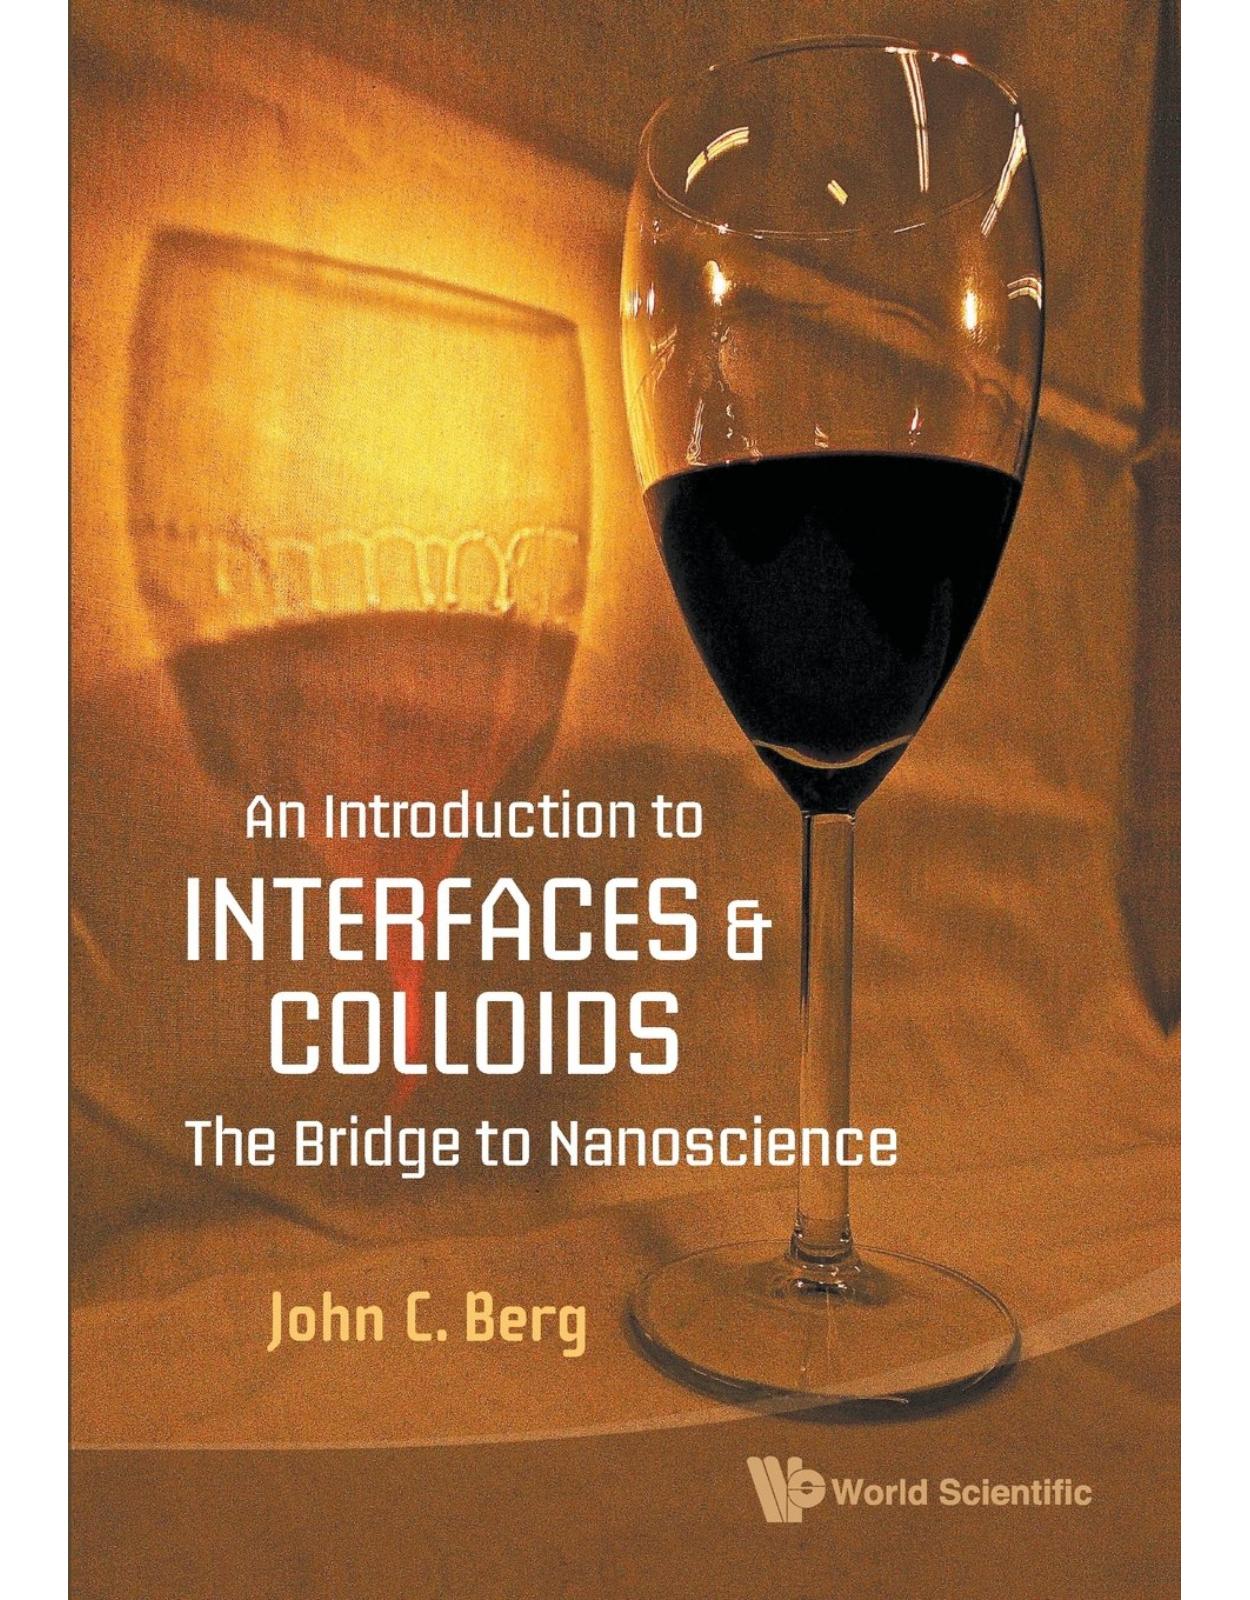 INTRODUCTION TO INTERFACES AND COLLOIDS, AN: THE BRIDGE TO NANOSCIENCE